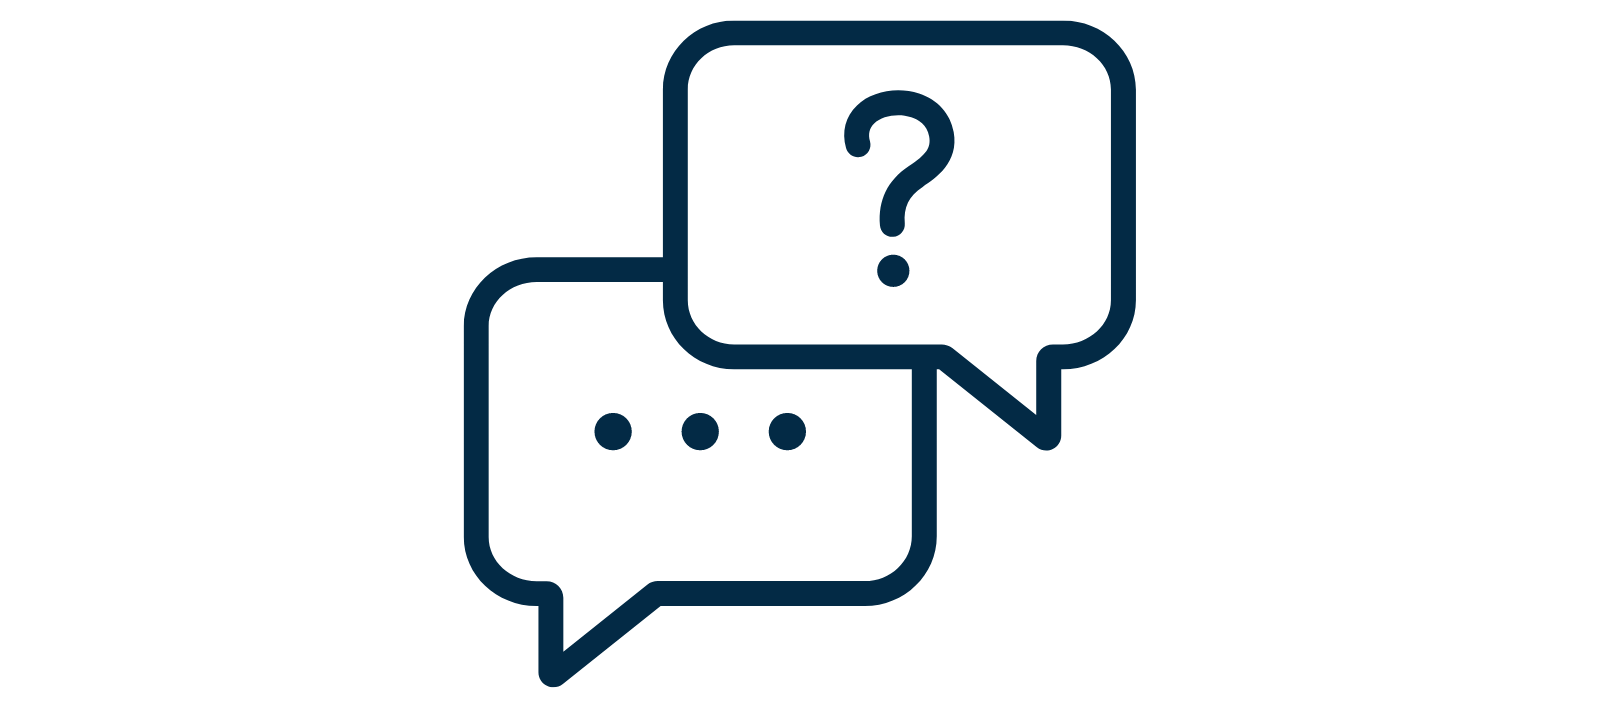 icon of two speech bubbles, one with a question mark and the other with an ellipsis